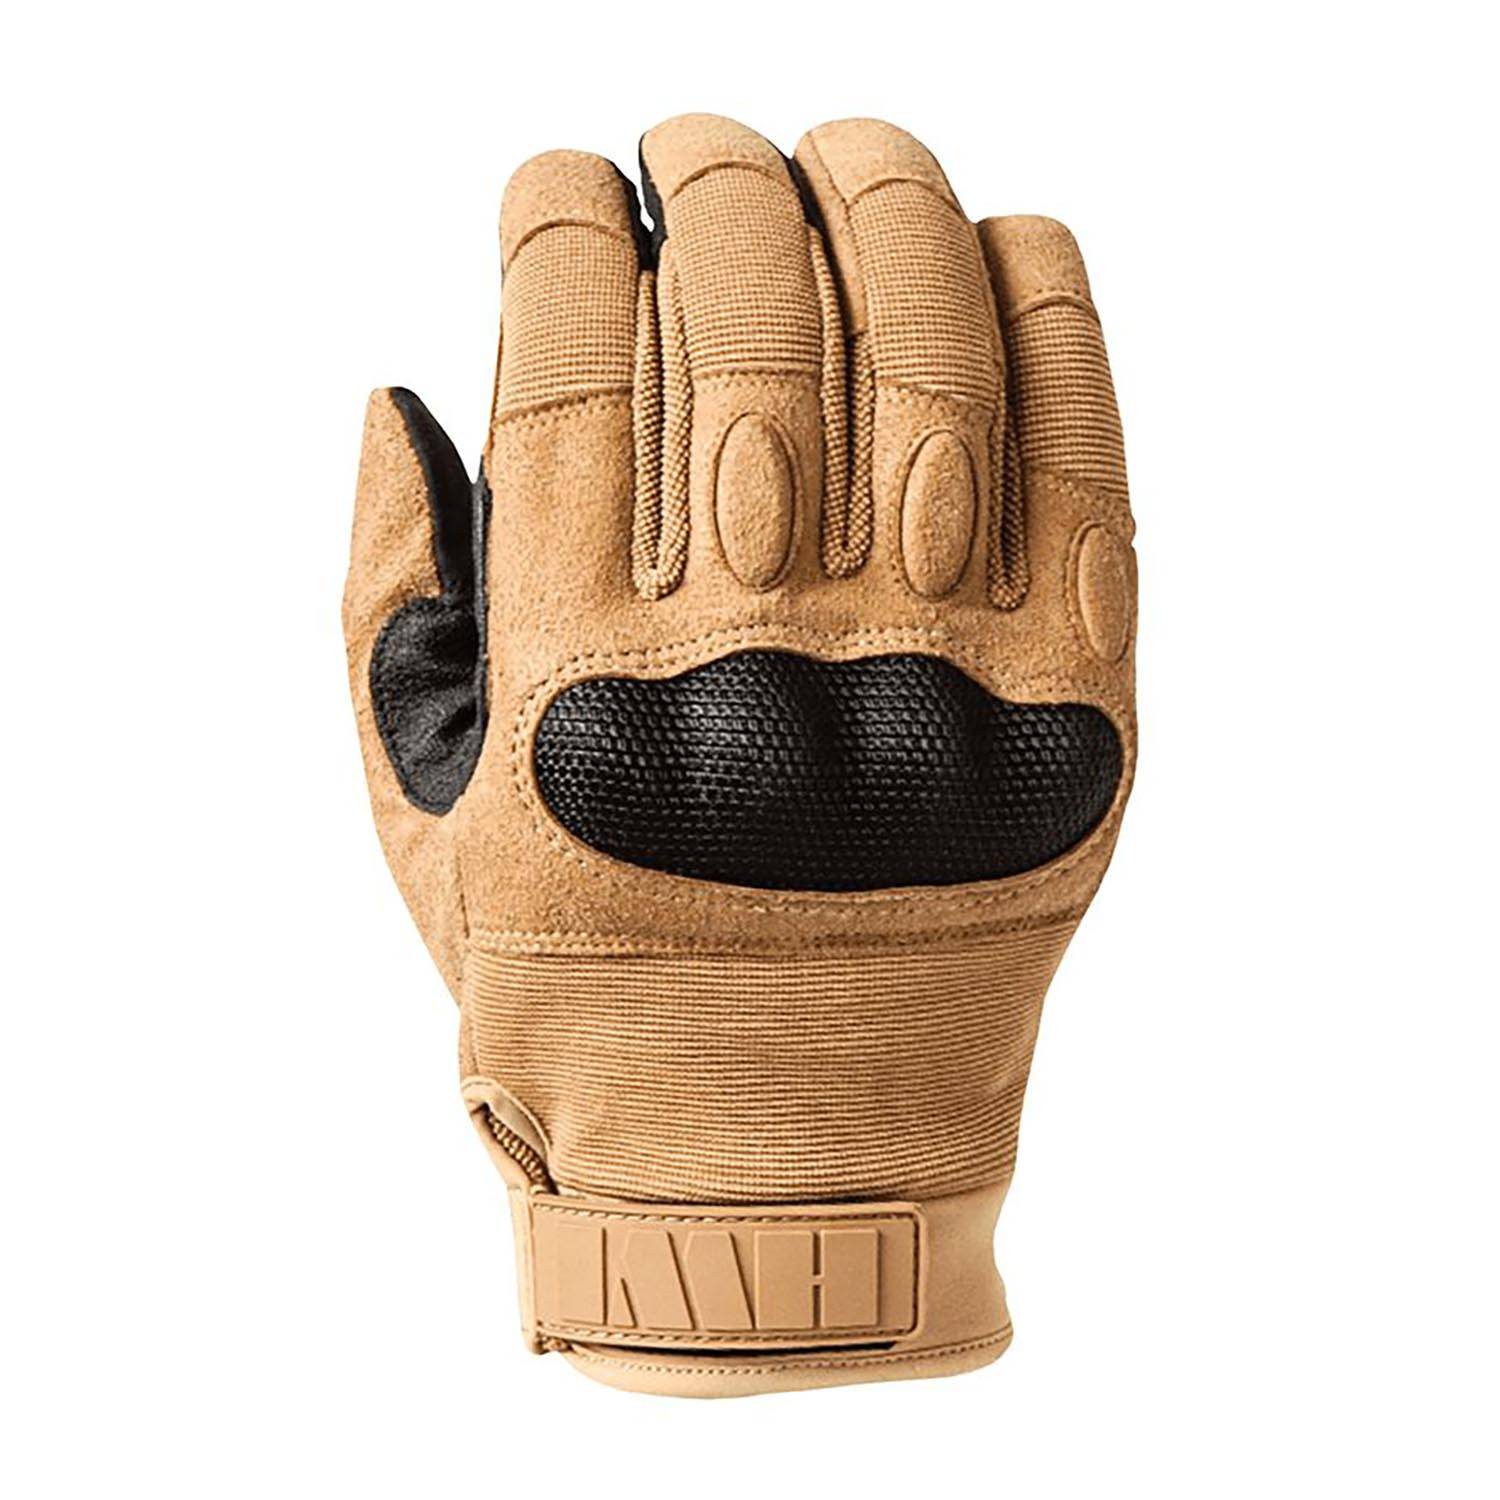 HWI Touchscreen Hard Knuckle Gloves, Coyote